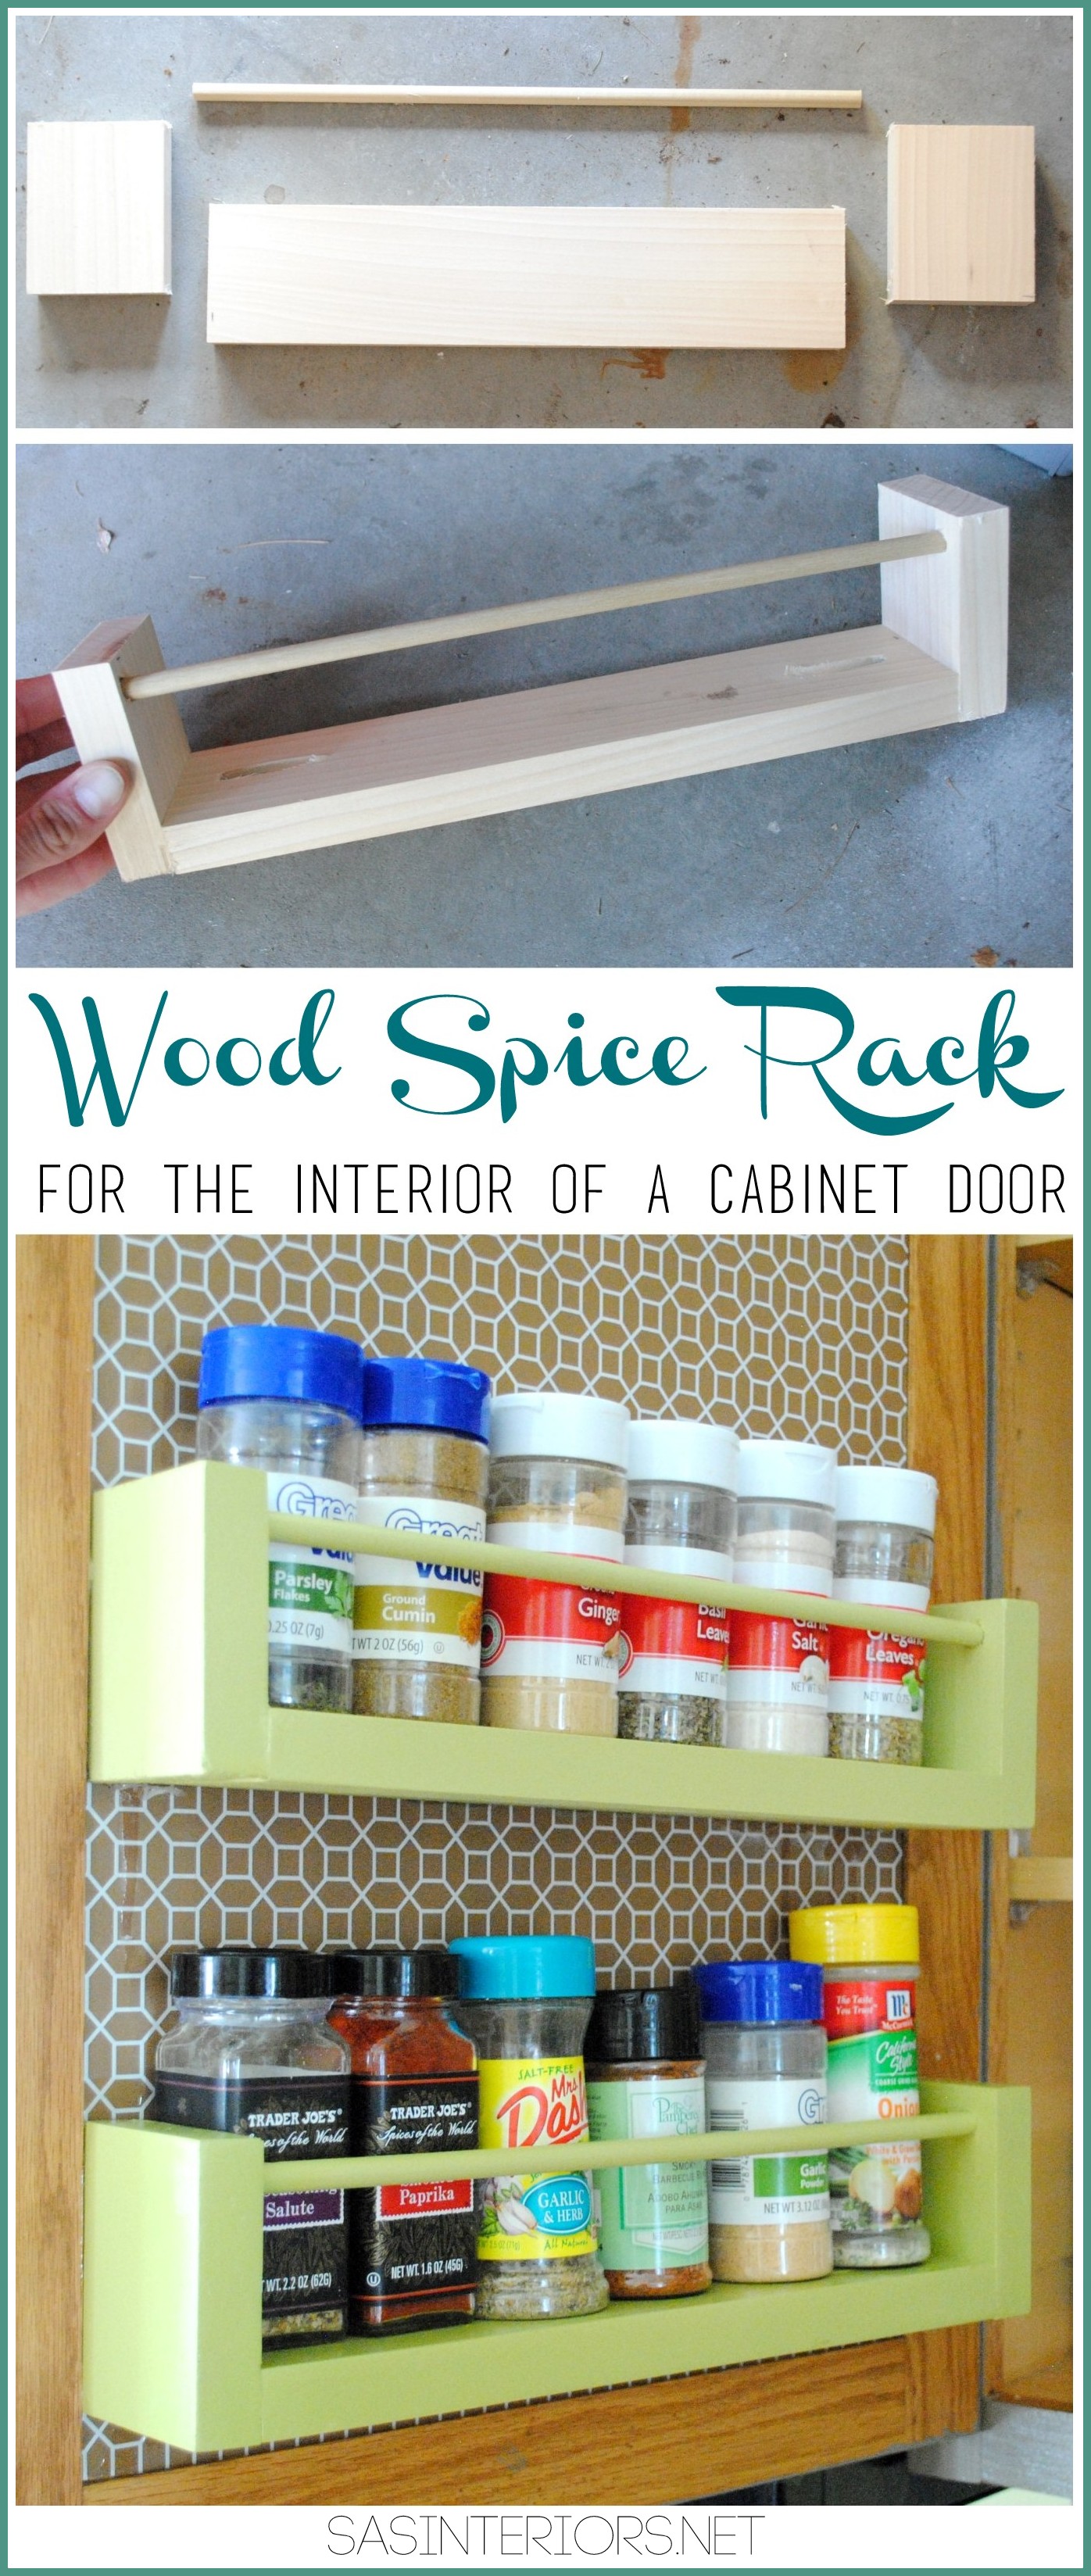 DIY: Wood Spice Rach Holder for inside the kitchen cabinets; Less than $8 to make, in 15 minutes by @Jenna_Burger, WWW.JENNABURGER.COM